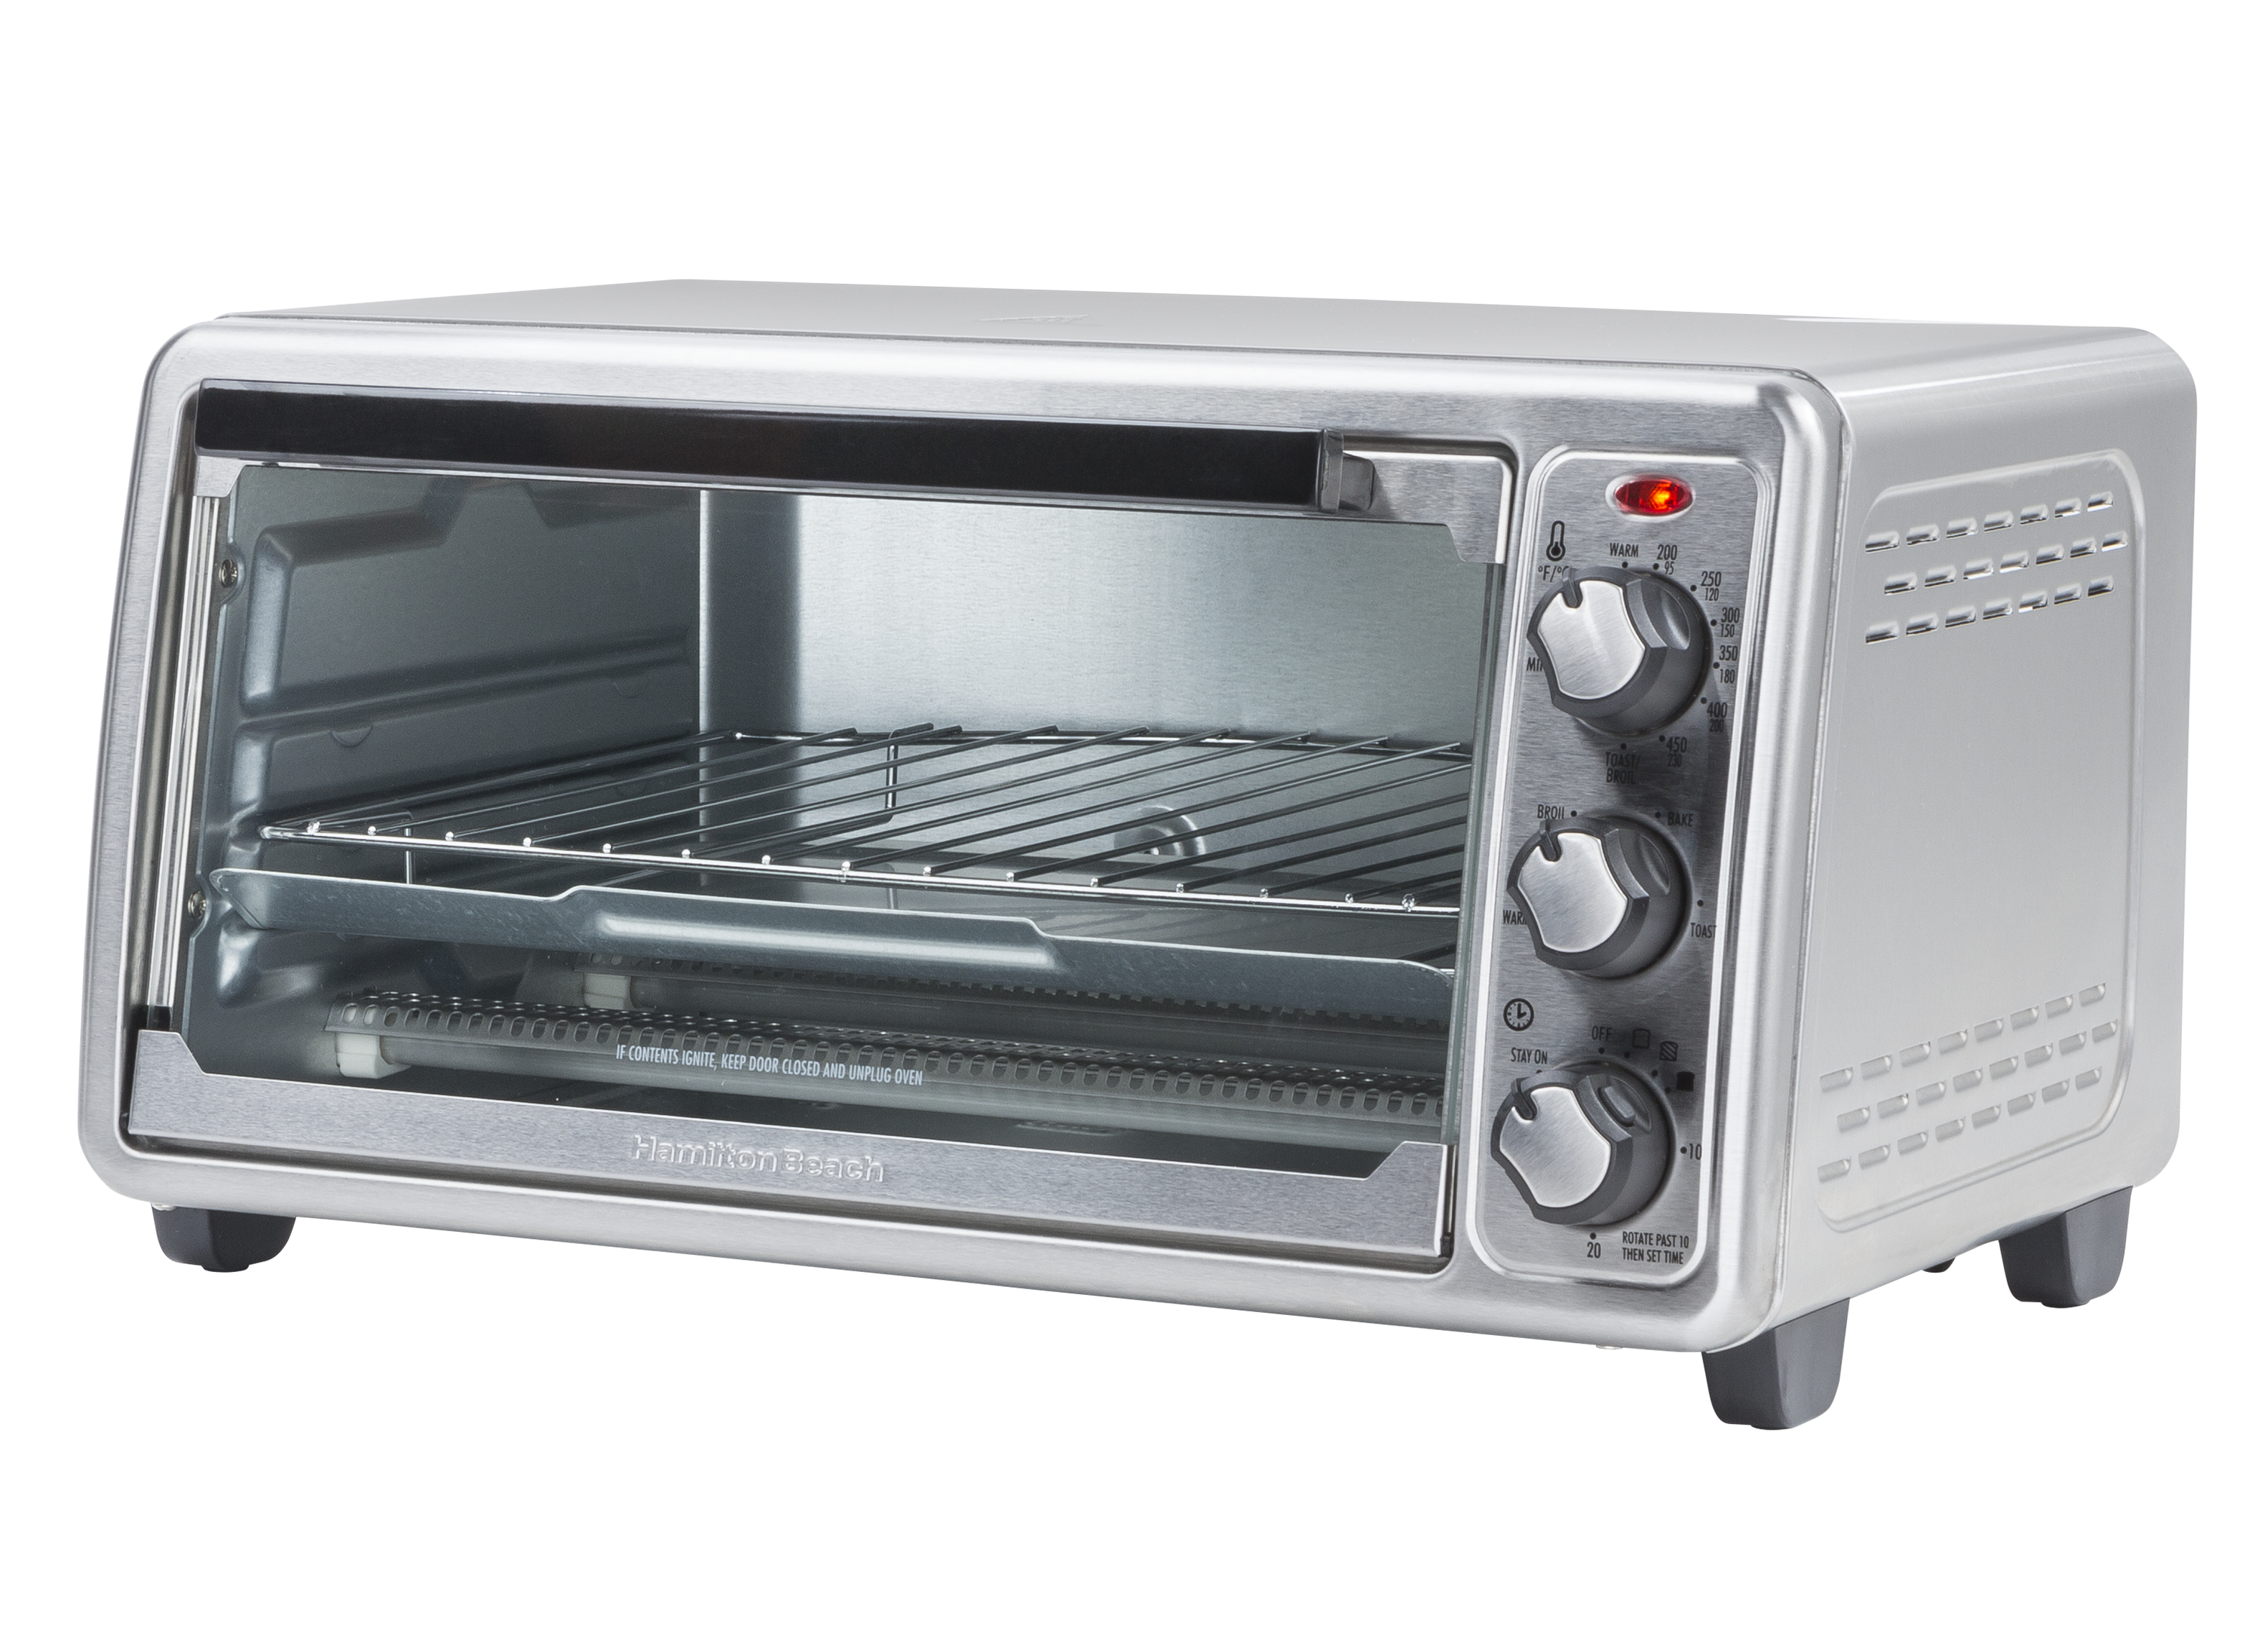 https://crdms.images.consumerreports.org/prod/products/cr/models/389606-toasterovens-hamiltonbeach-6slice31411.png